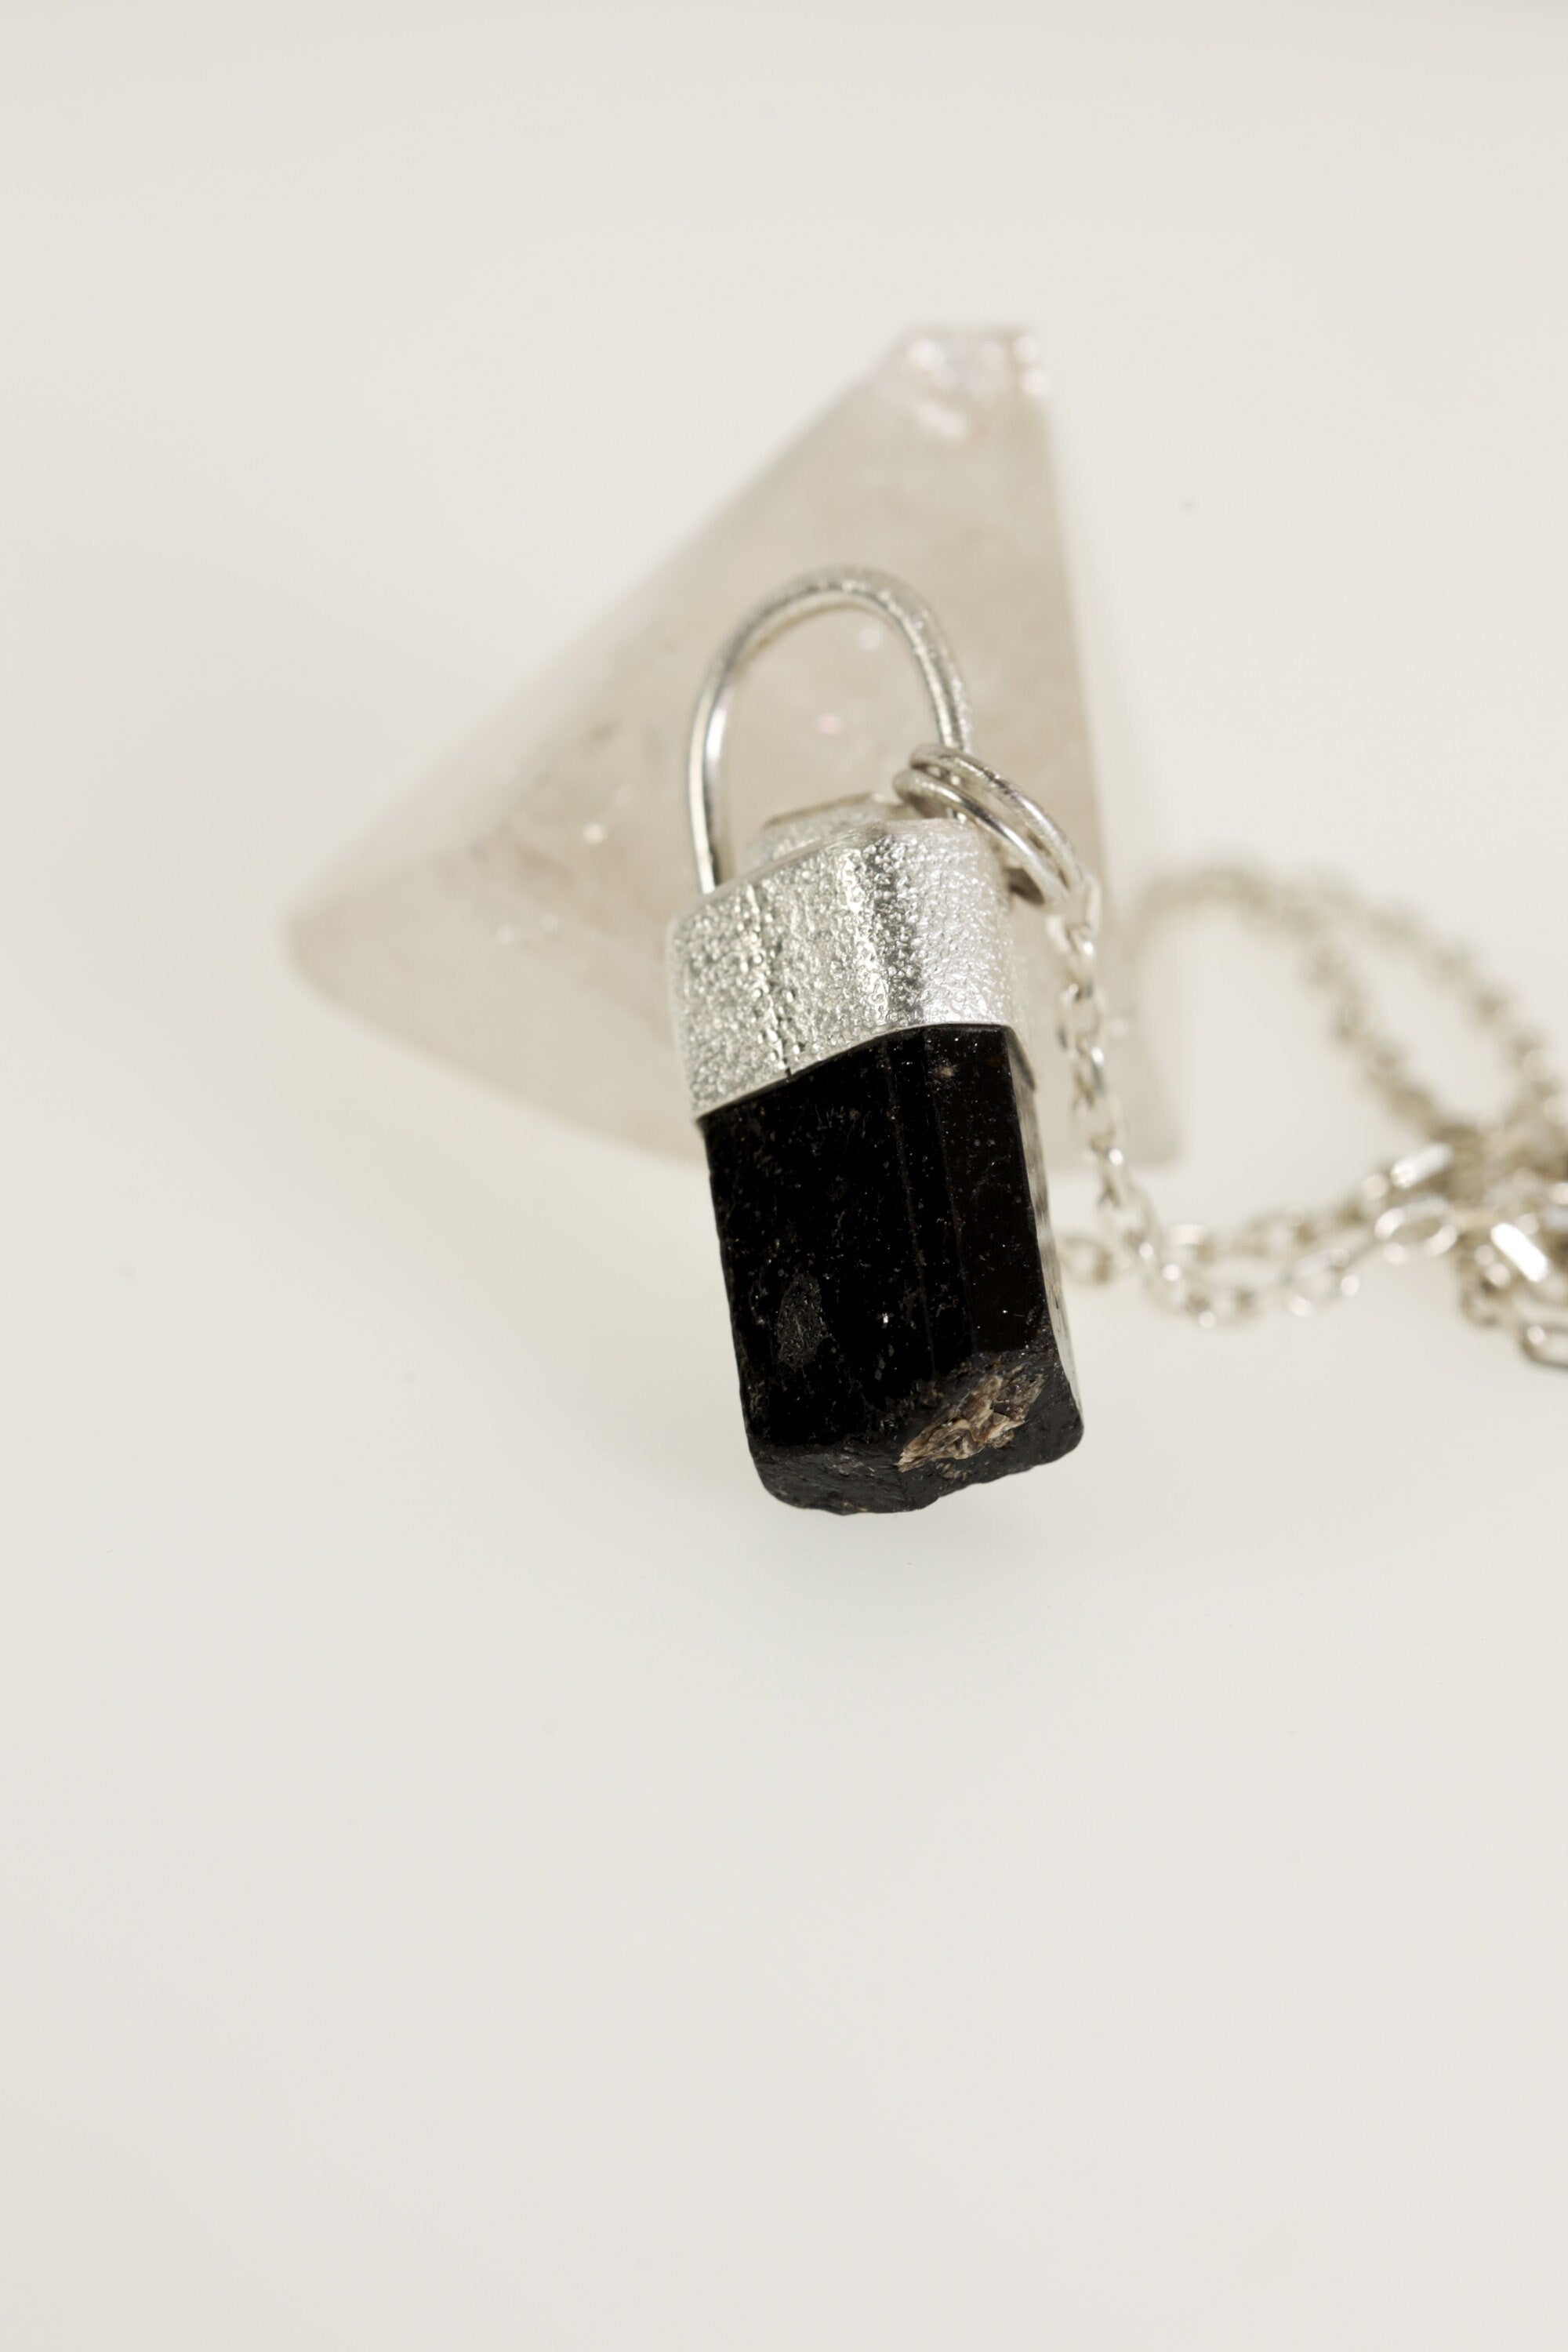 Earthen Brilliance: Sterling Silver Pendant with Himalayan Terminated Brown Dravite Tourmaline and Diamond - Sand Texture Finish - NO/02